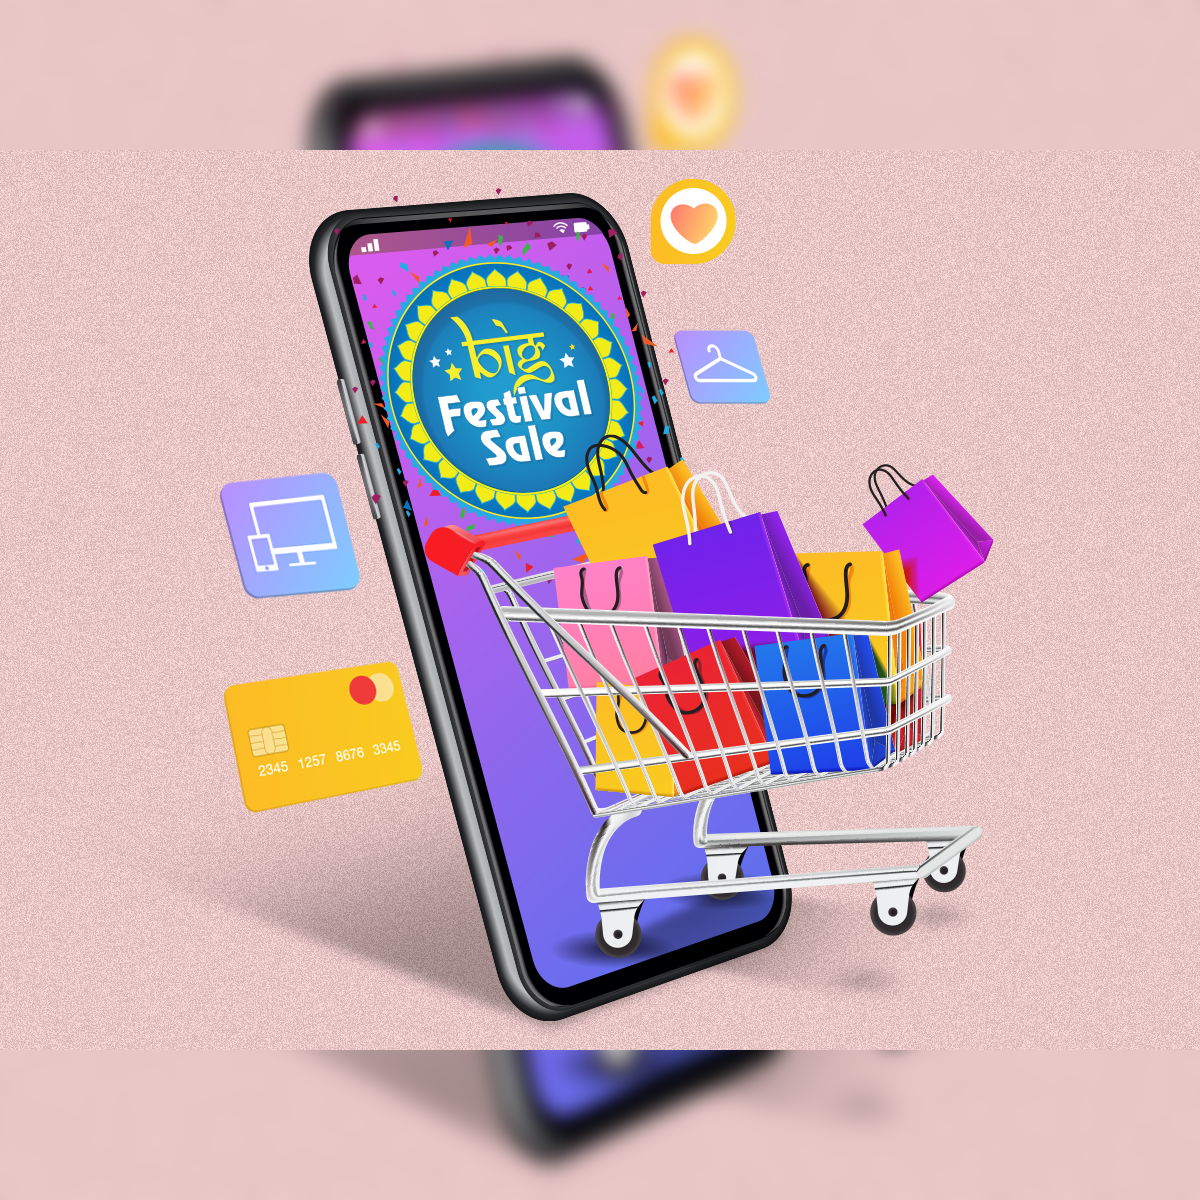 Flipkart Big Billion Days 2023 sale: When is Flipkart Big Billion Days 2023 sale  starting? What are discount offers? Here are details - The Economic Times